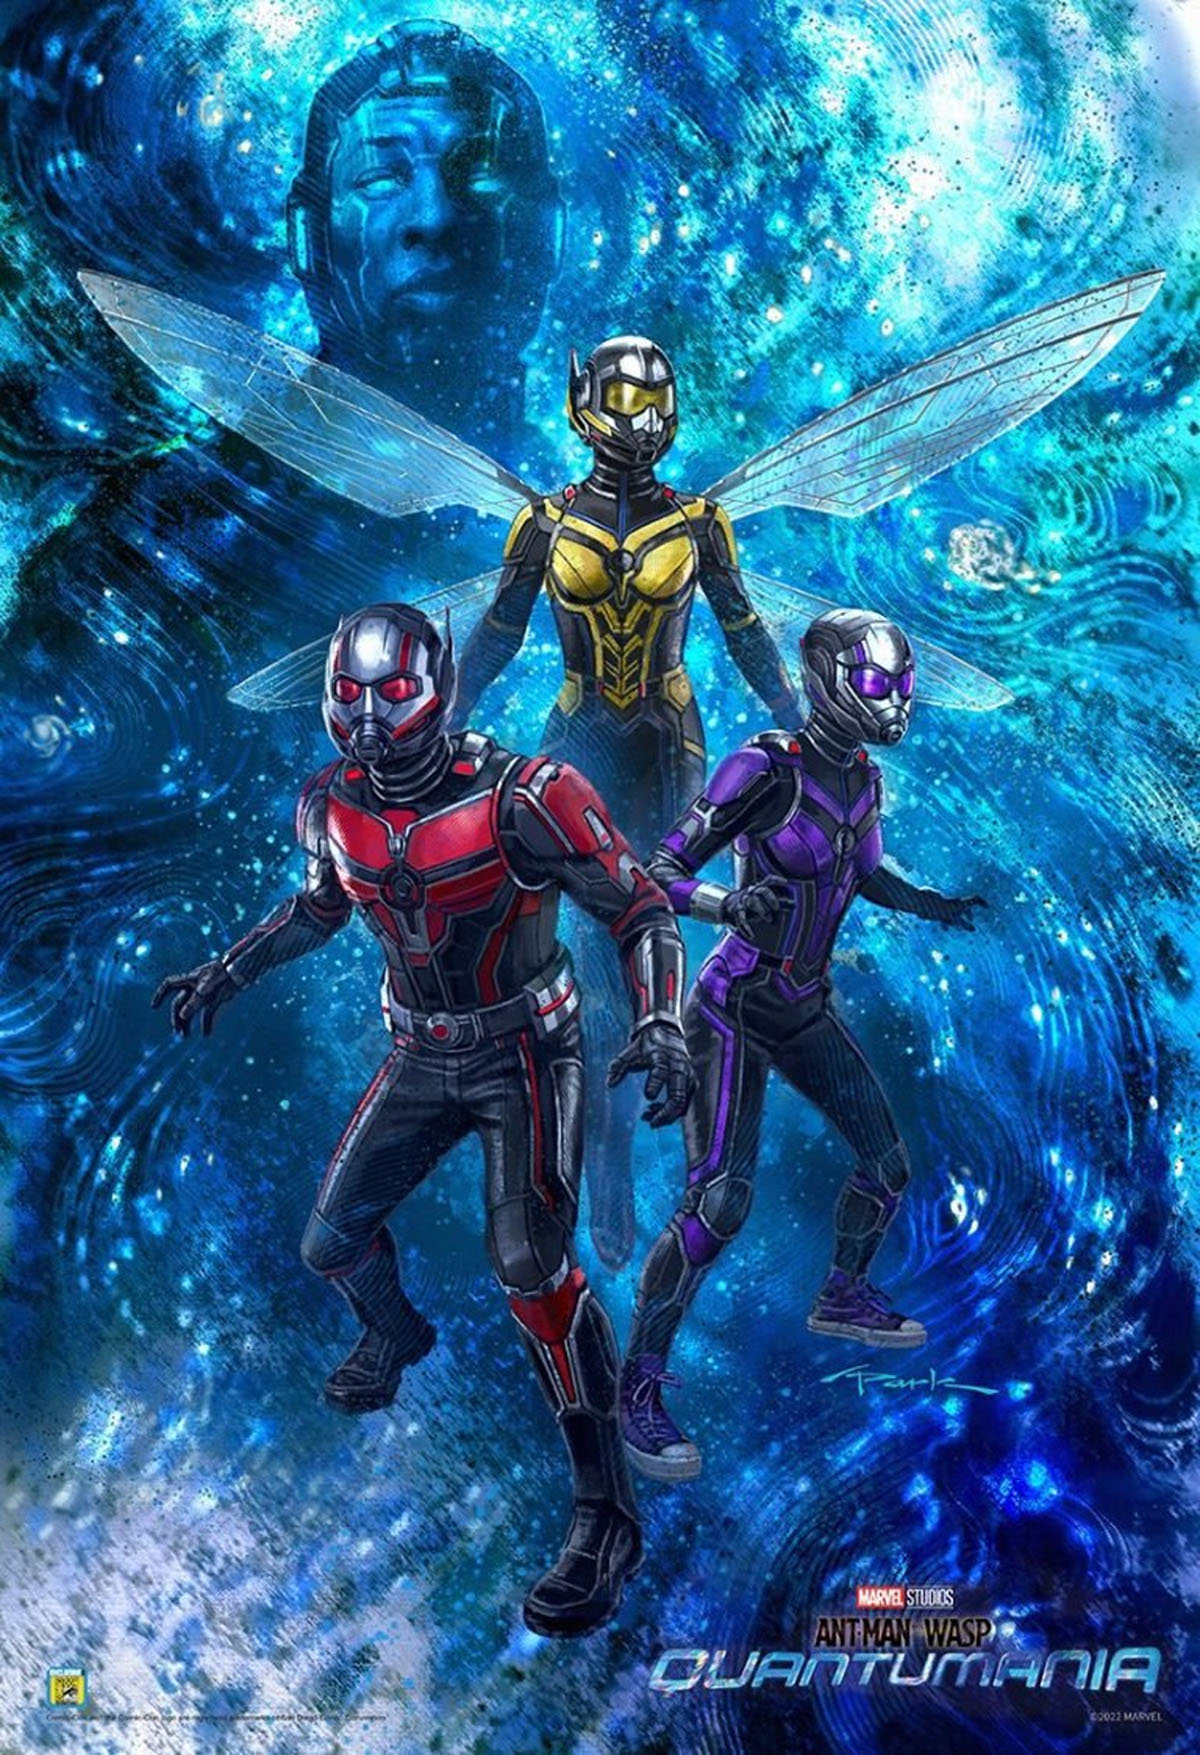 In this poster for Ant-Man and the Wasp: Quantumania (2023) Wait